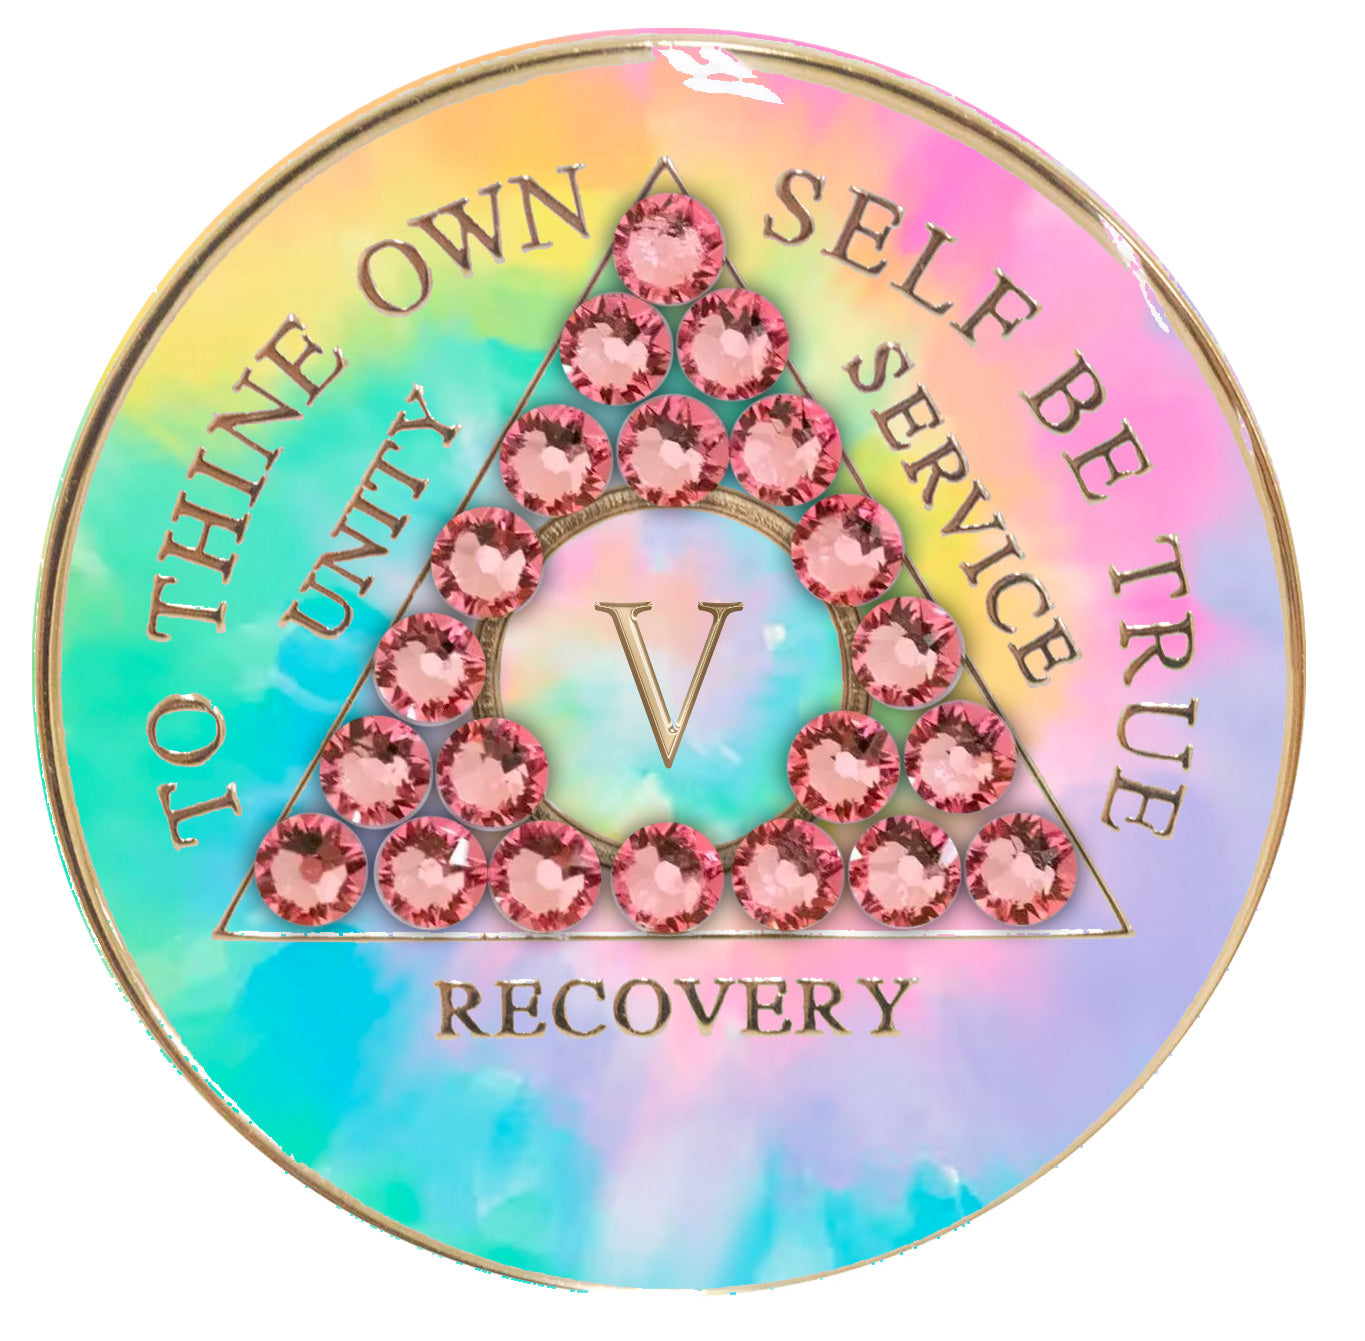 5 year AA medallion pastel tie-dye representing a psychic change that is needed in the recovery journey, with twenty-one light rose genuine crystals, pink, blue, yellow, and green, in the shape of the triangle, with the AA moto and roman numeral embossed in 14k gold-plated brass, the medallion is sealed with resin for a glossy, scratch free finish.